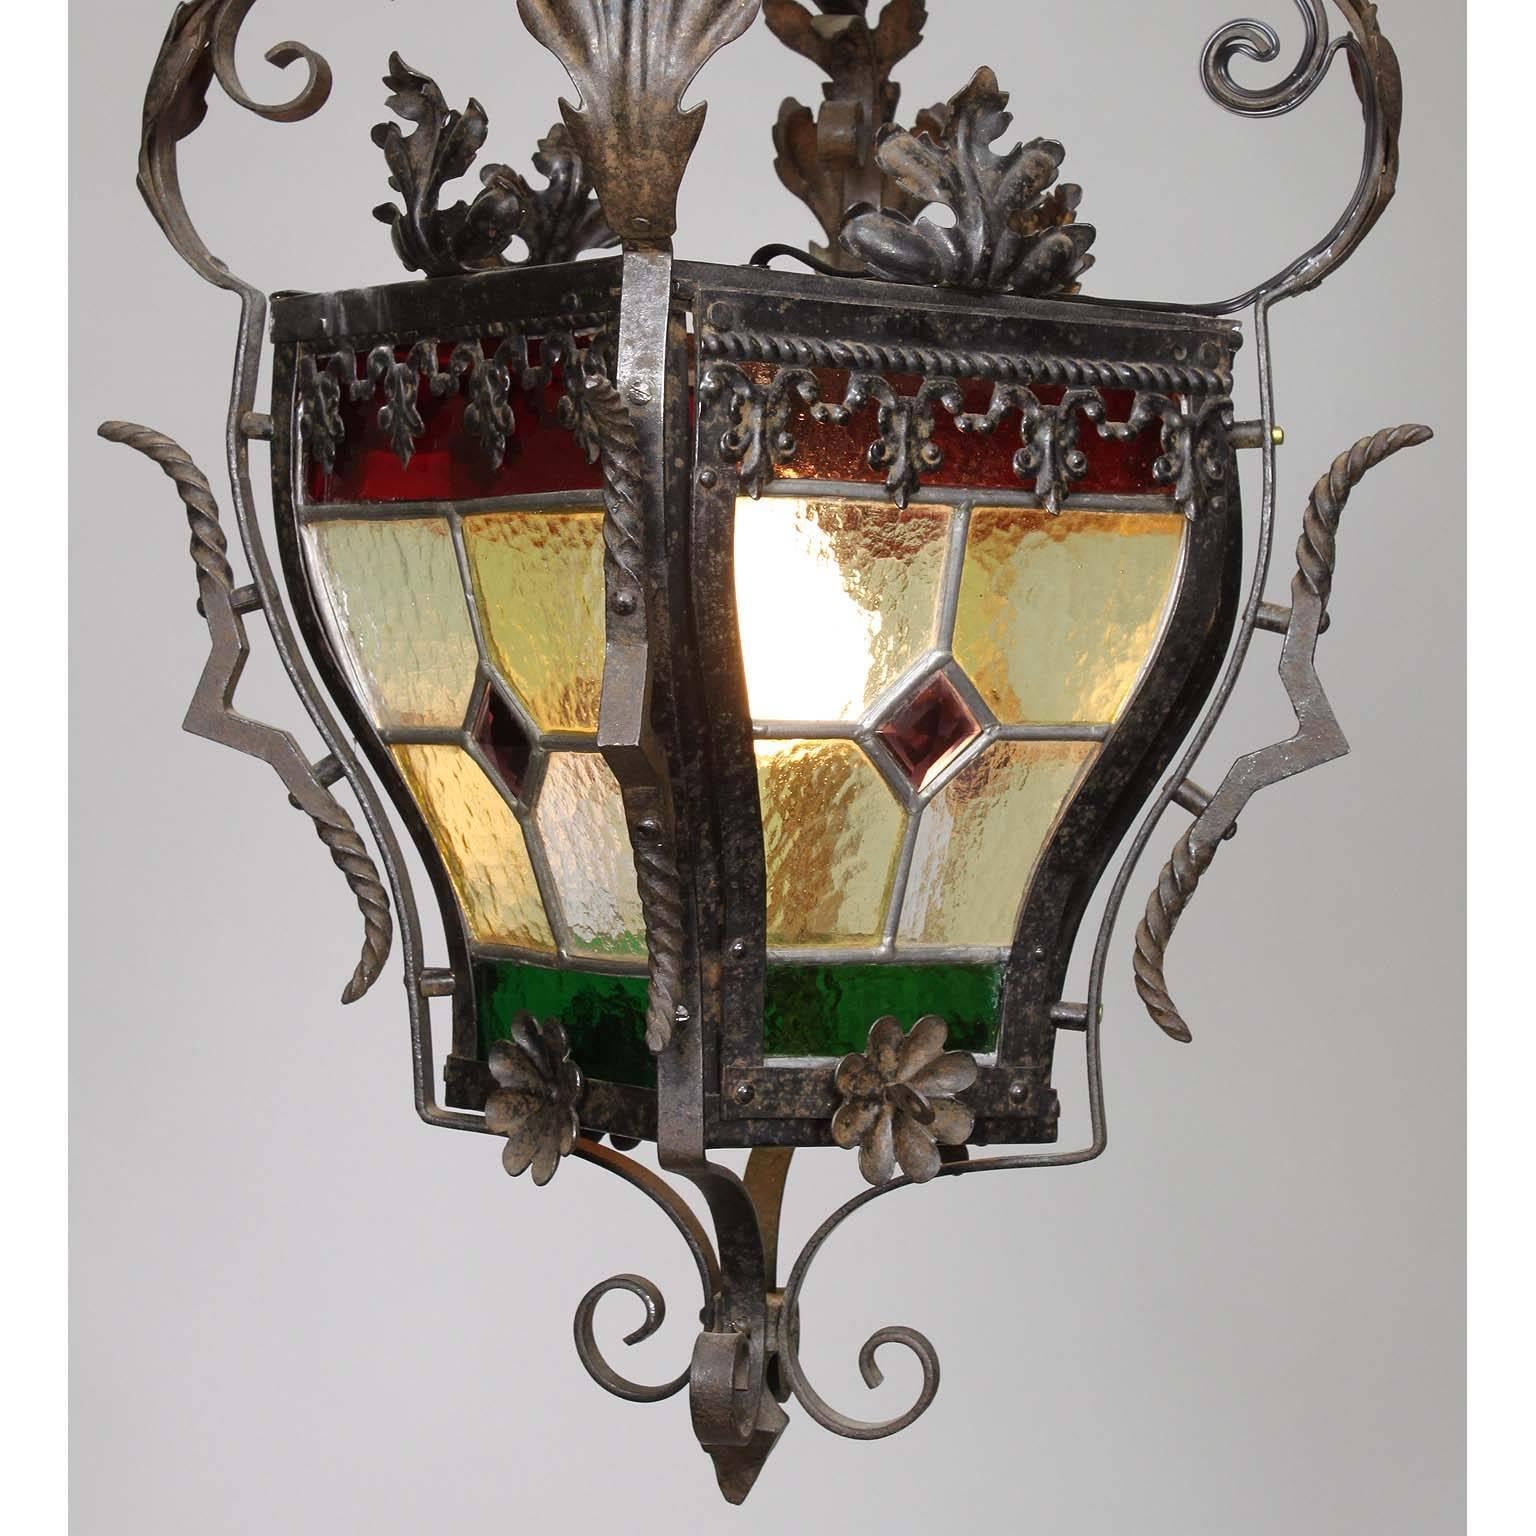 Baroque Revival French Baroque Style Wrought-Iron Stained Glass Hall Lantern, 19th-20th Century For Sale